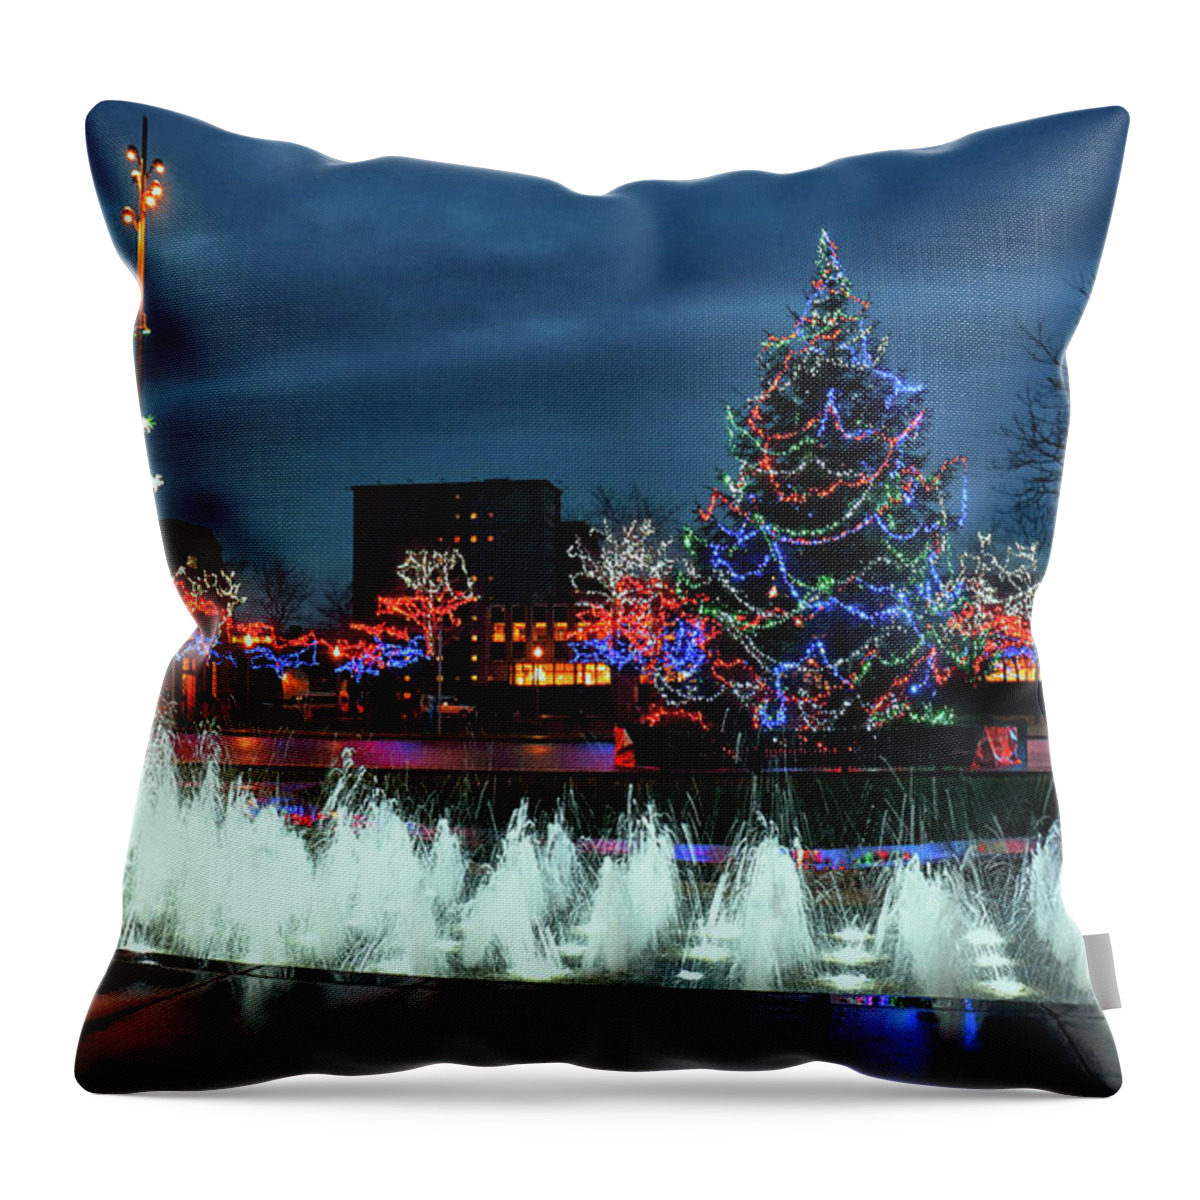 Christmas Lights Throw Pillow featuring the photograph Christmas Lights #1 by Jeff Townsend